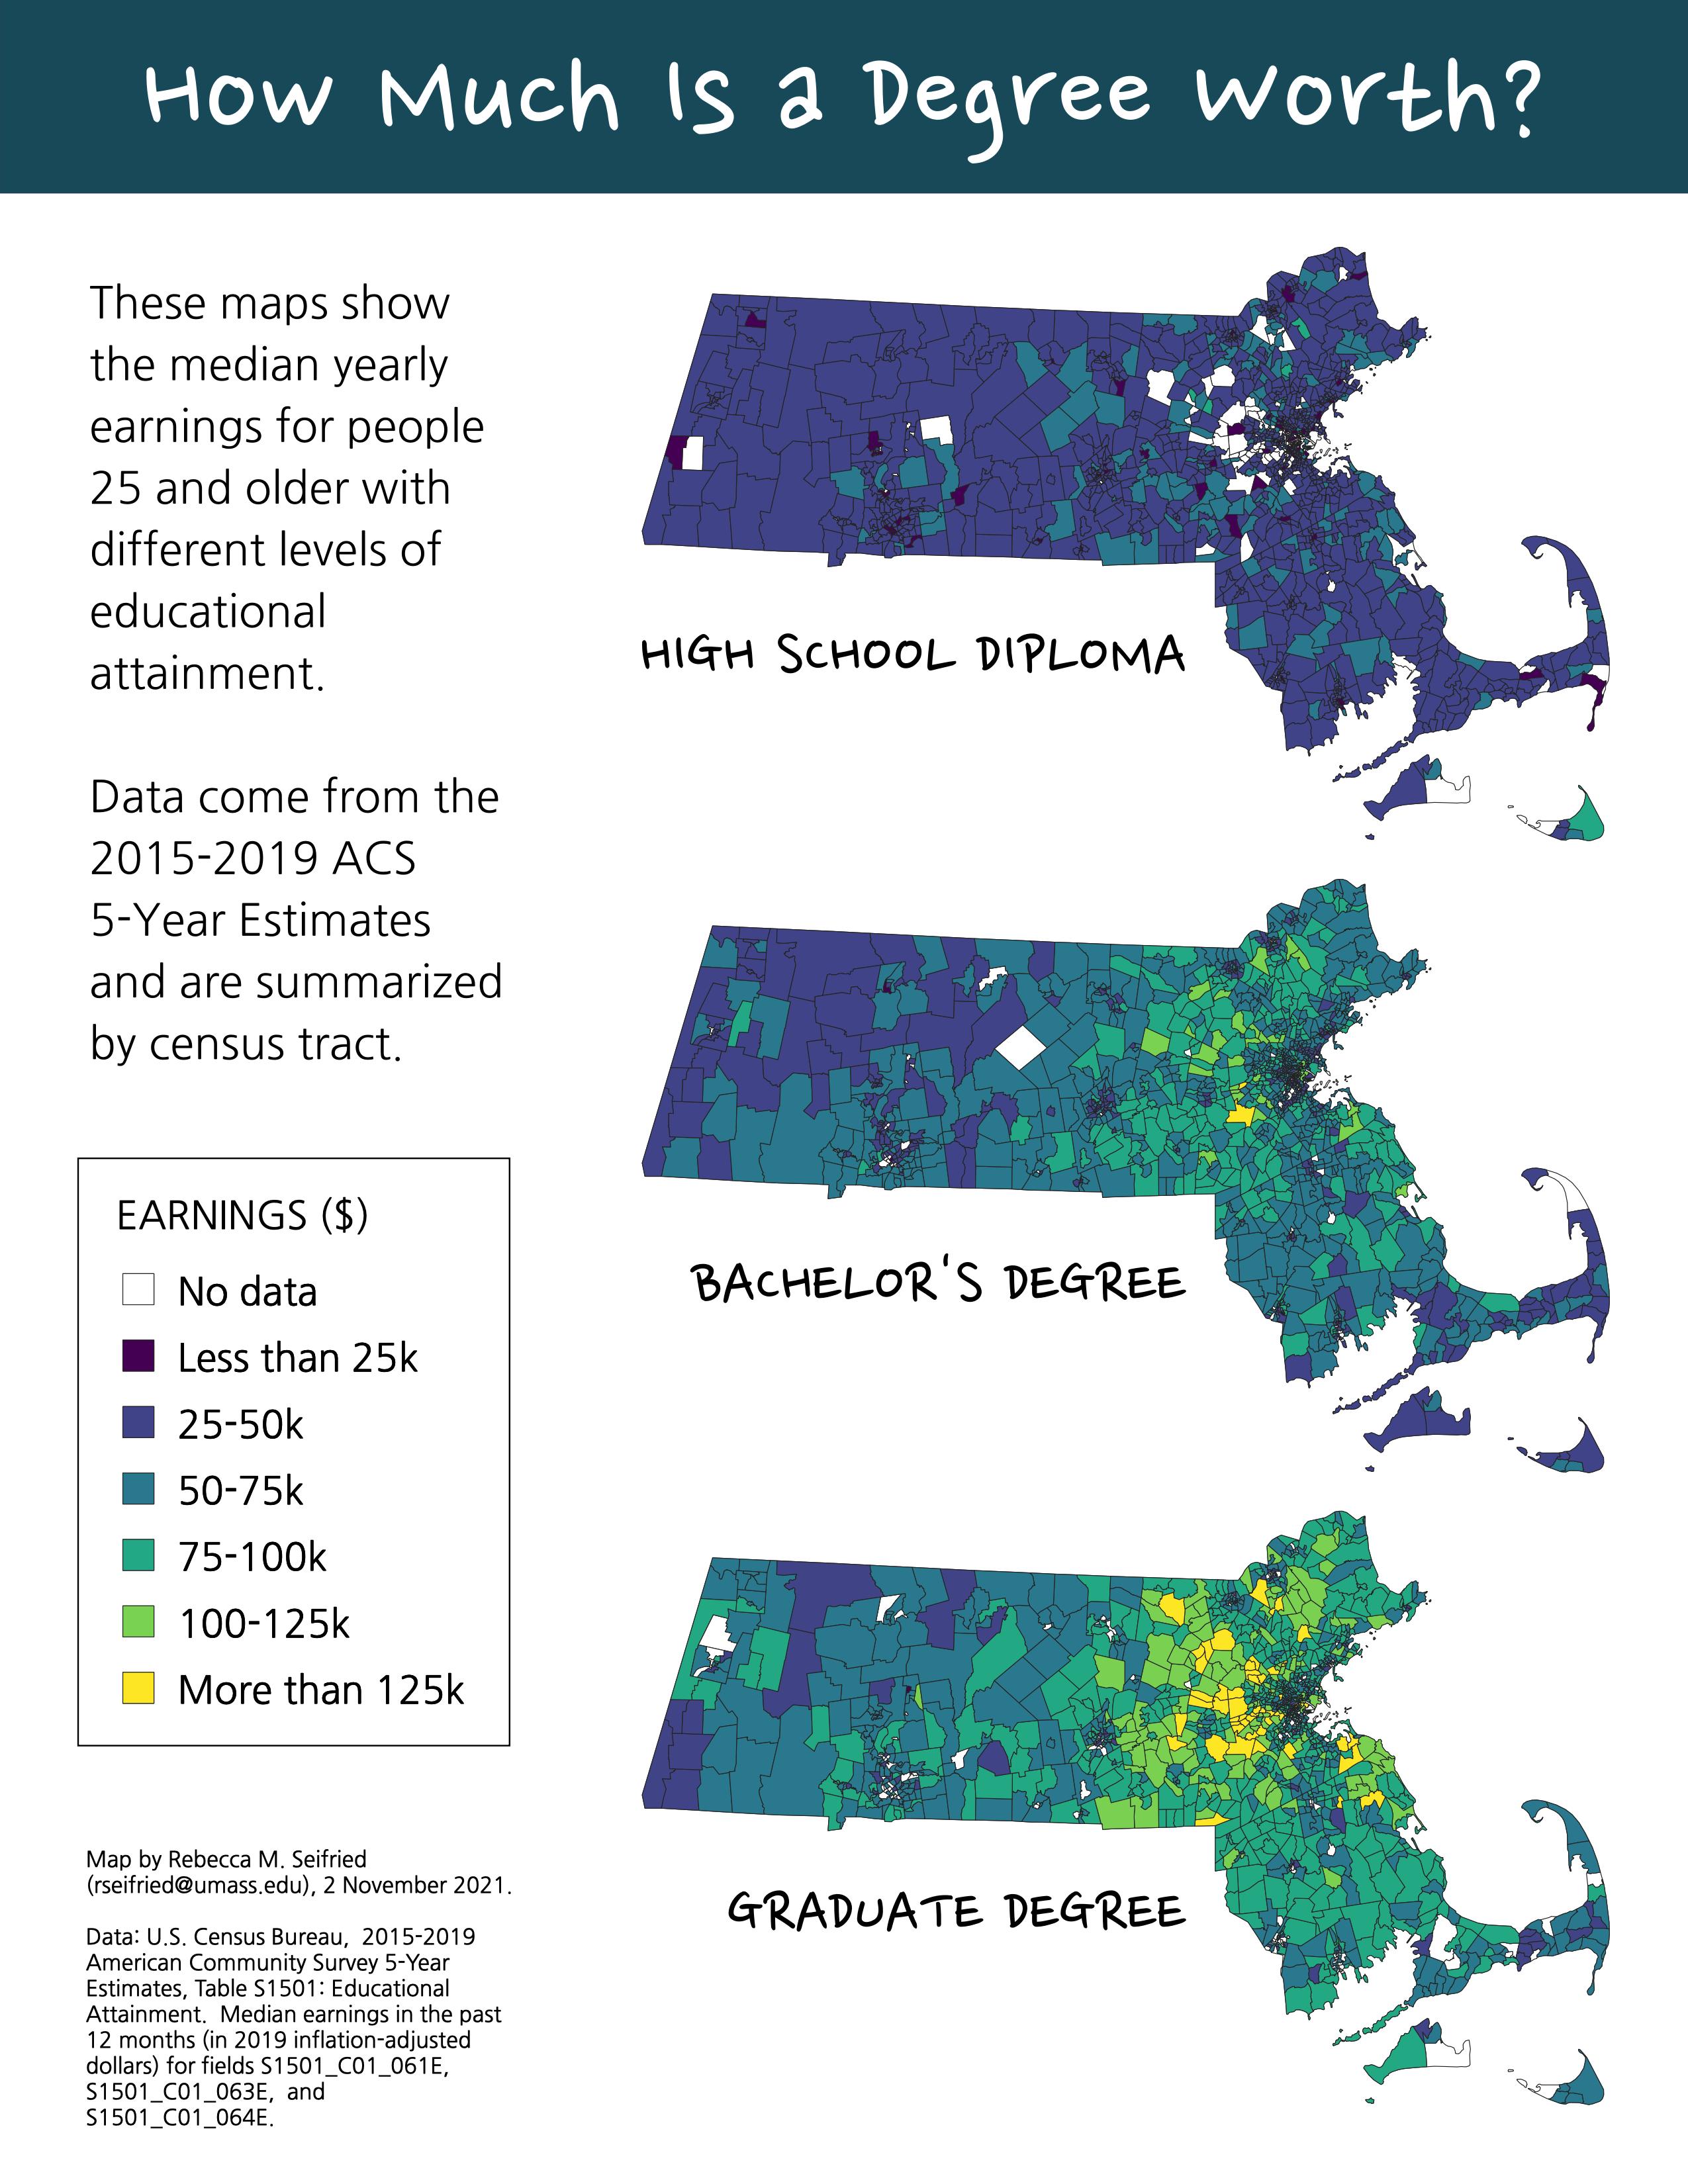 Three maps showing the median earnings of people in each census tract in Massachusetts, depending on whether they earned a high school diploma, a Bachelors degree, or a graduate degree. Darker colors represent lower earnings. Two main patterns are visible: for folks with high school degrees, earnings are lower, but not spatially variable. For folks with additional degrees, earnings are higher, and this patterns is most concentrated around cities - especially Boston.